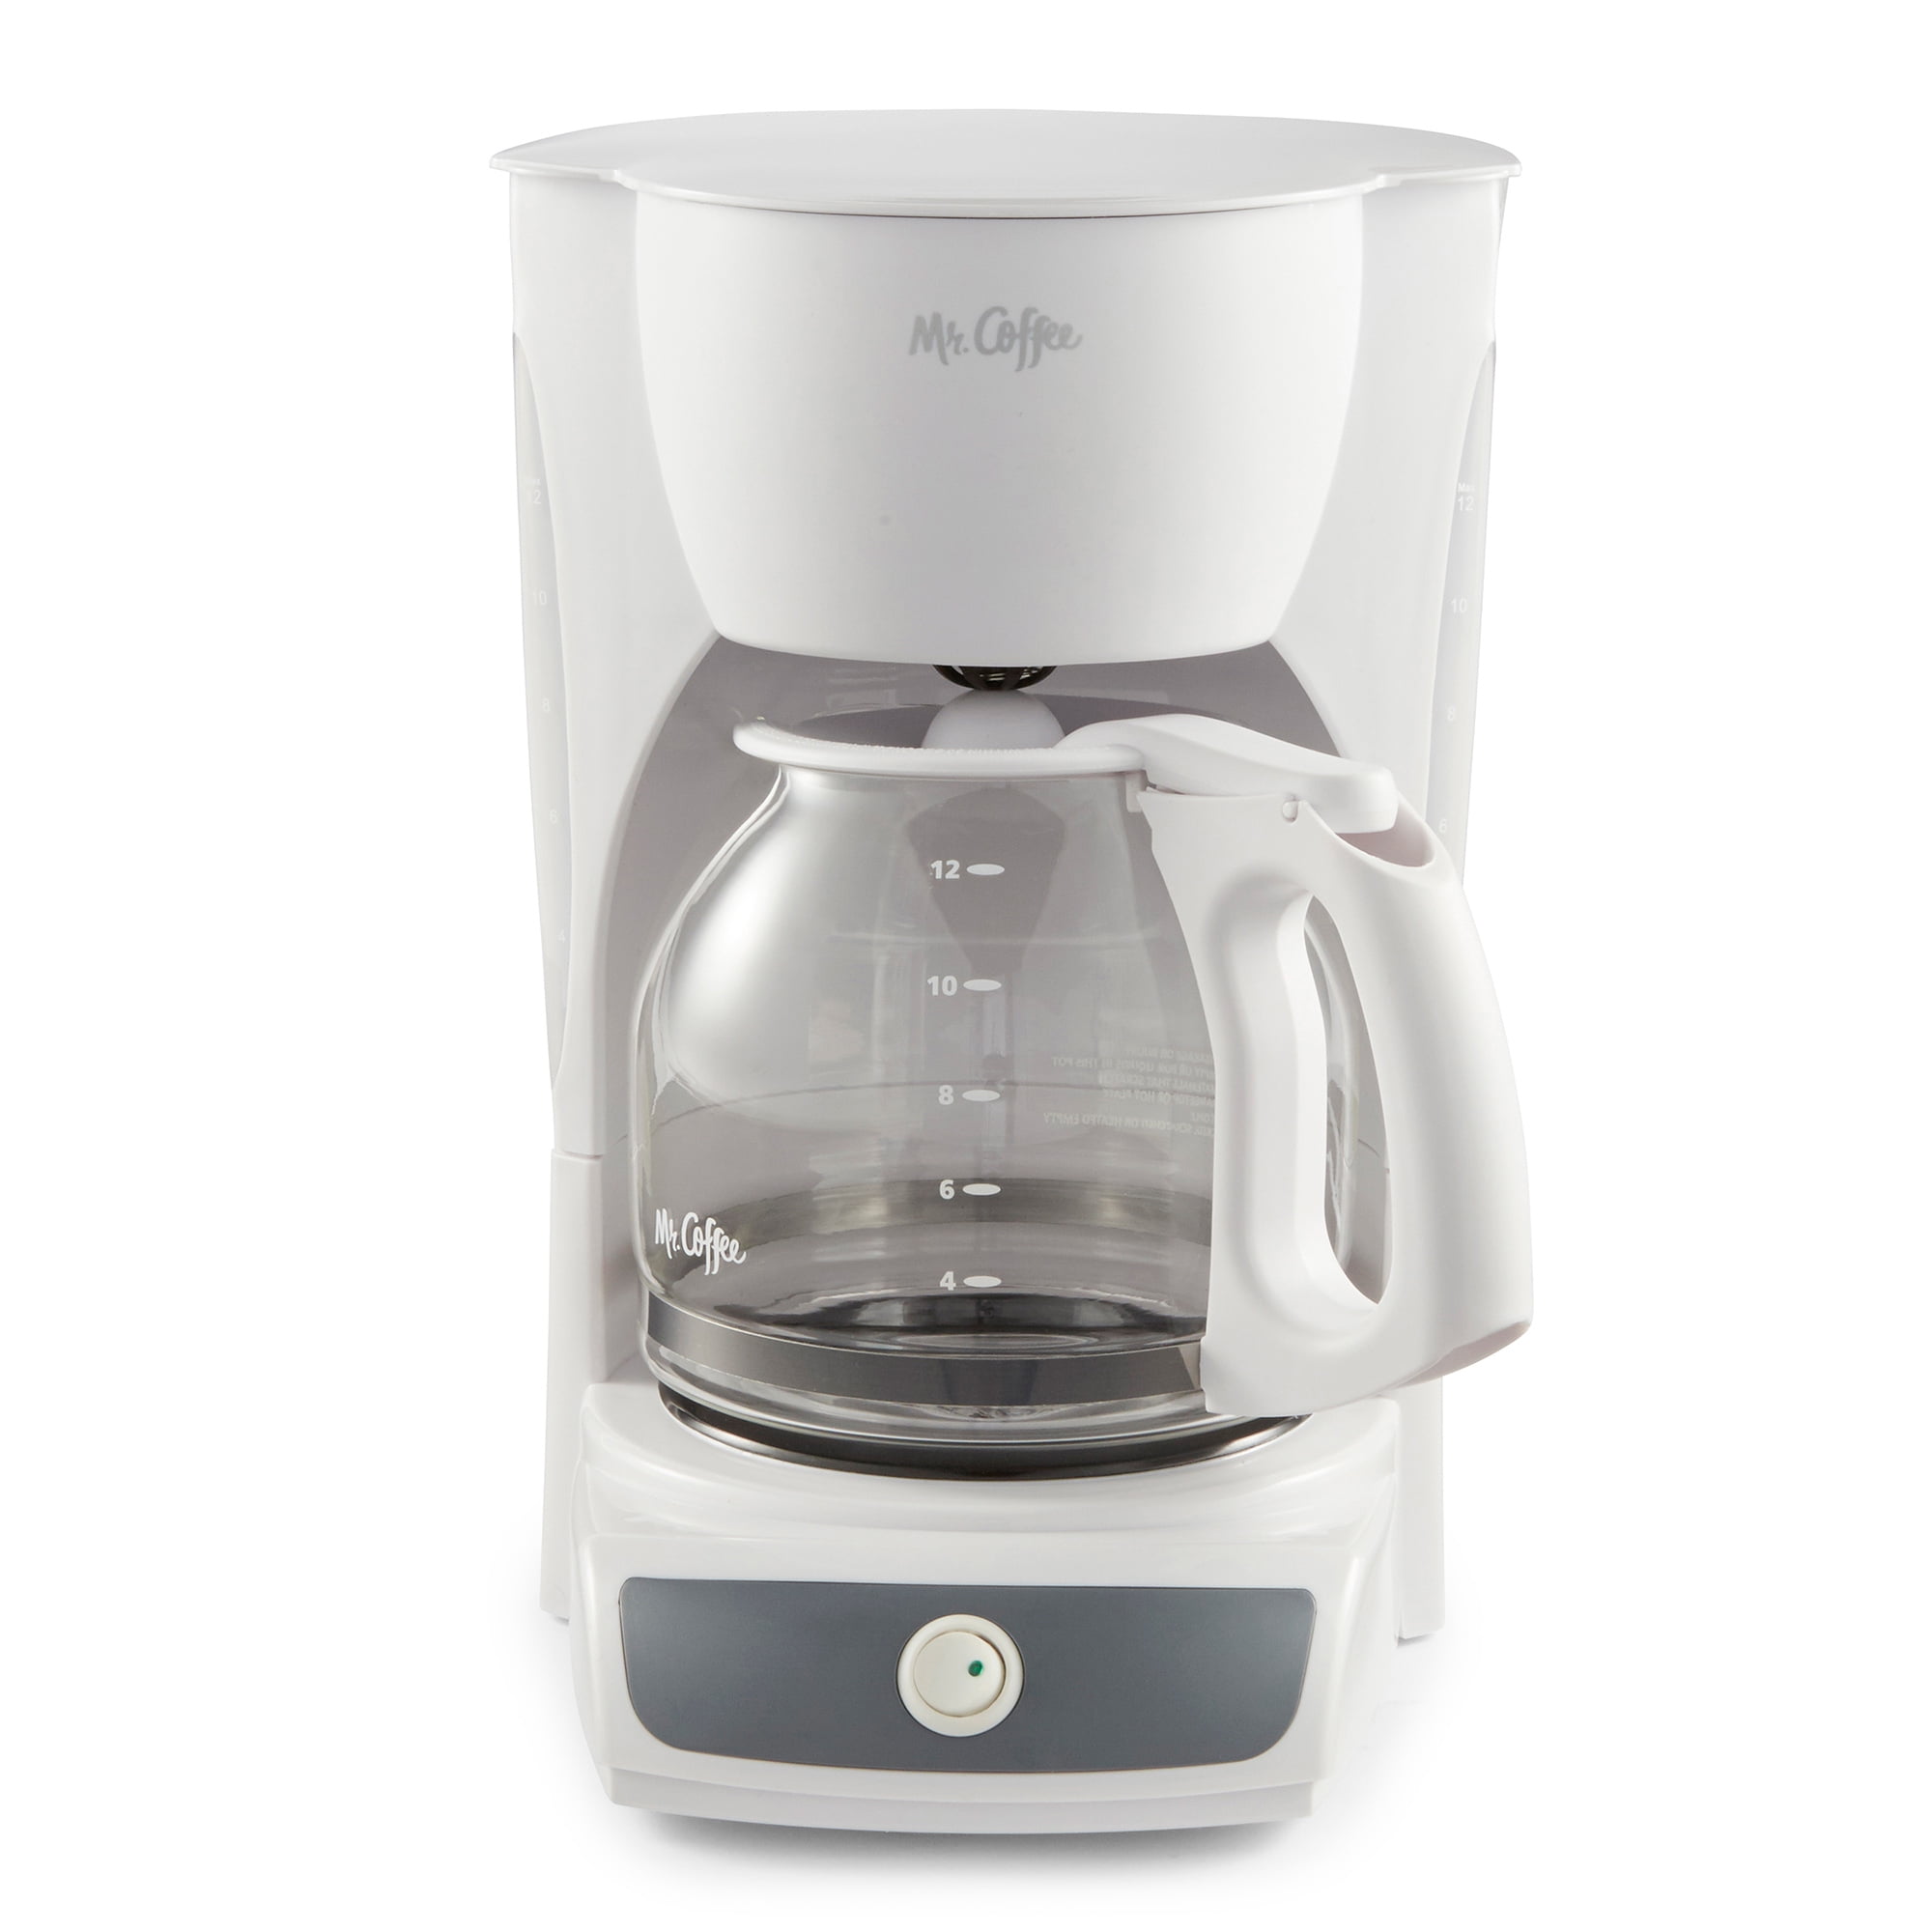 Mr. Coffee SK12-NP 12 Cups Coffee Maker - White for sale online